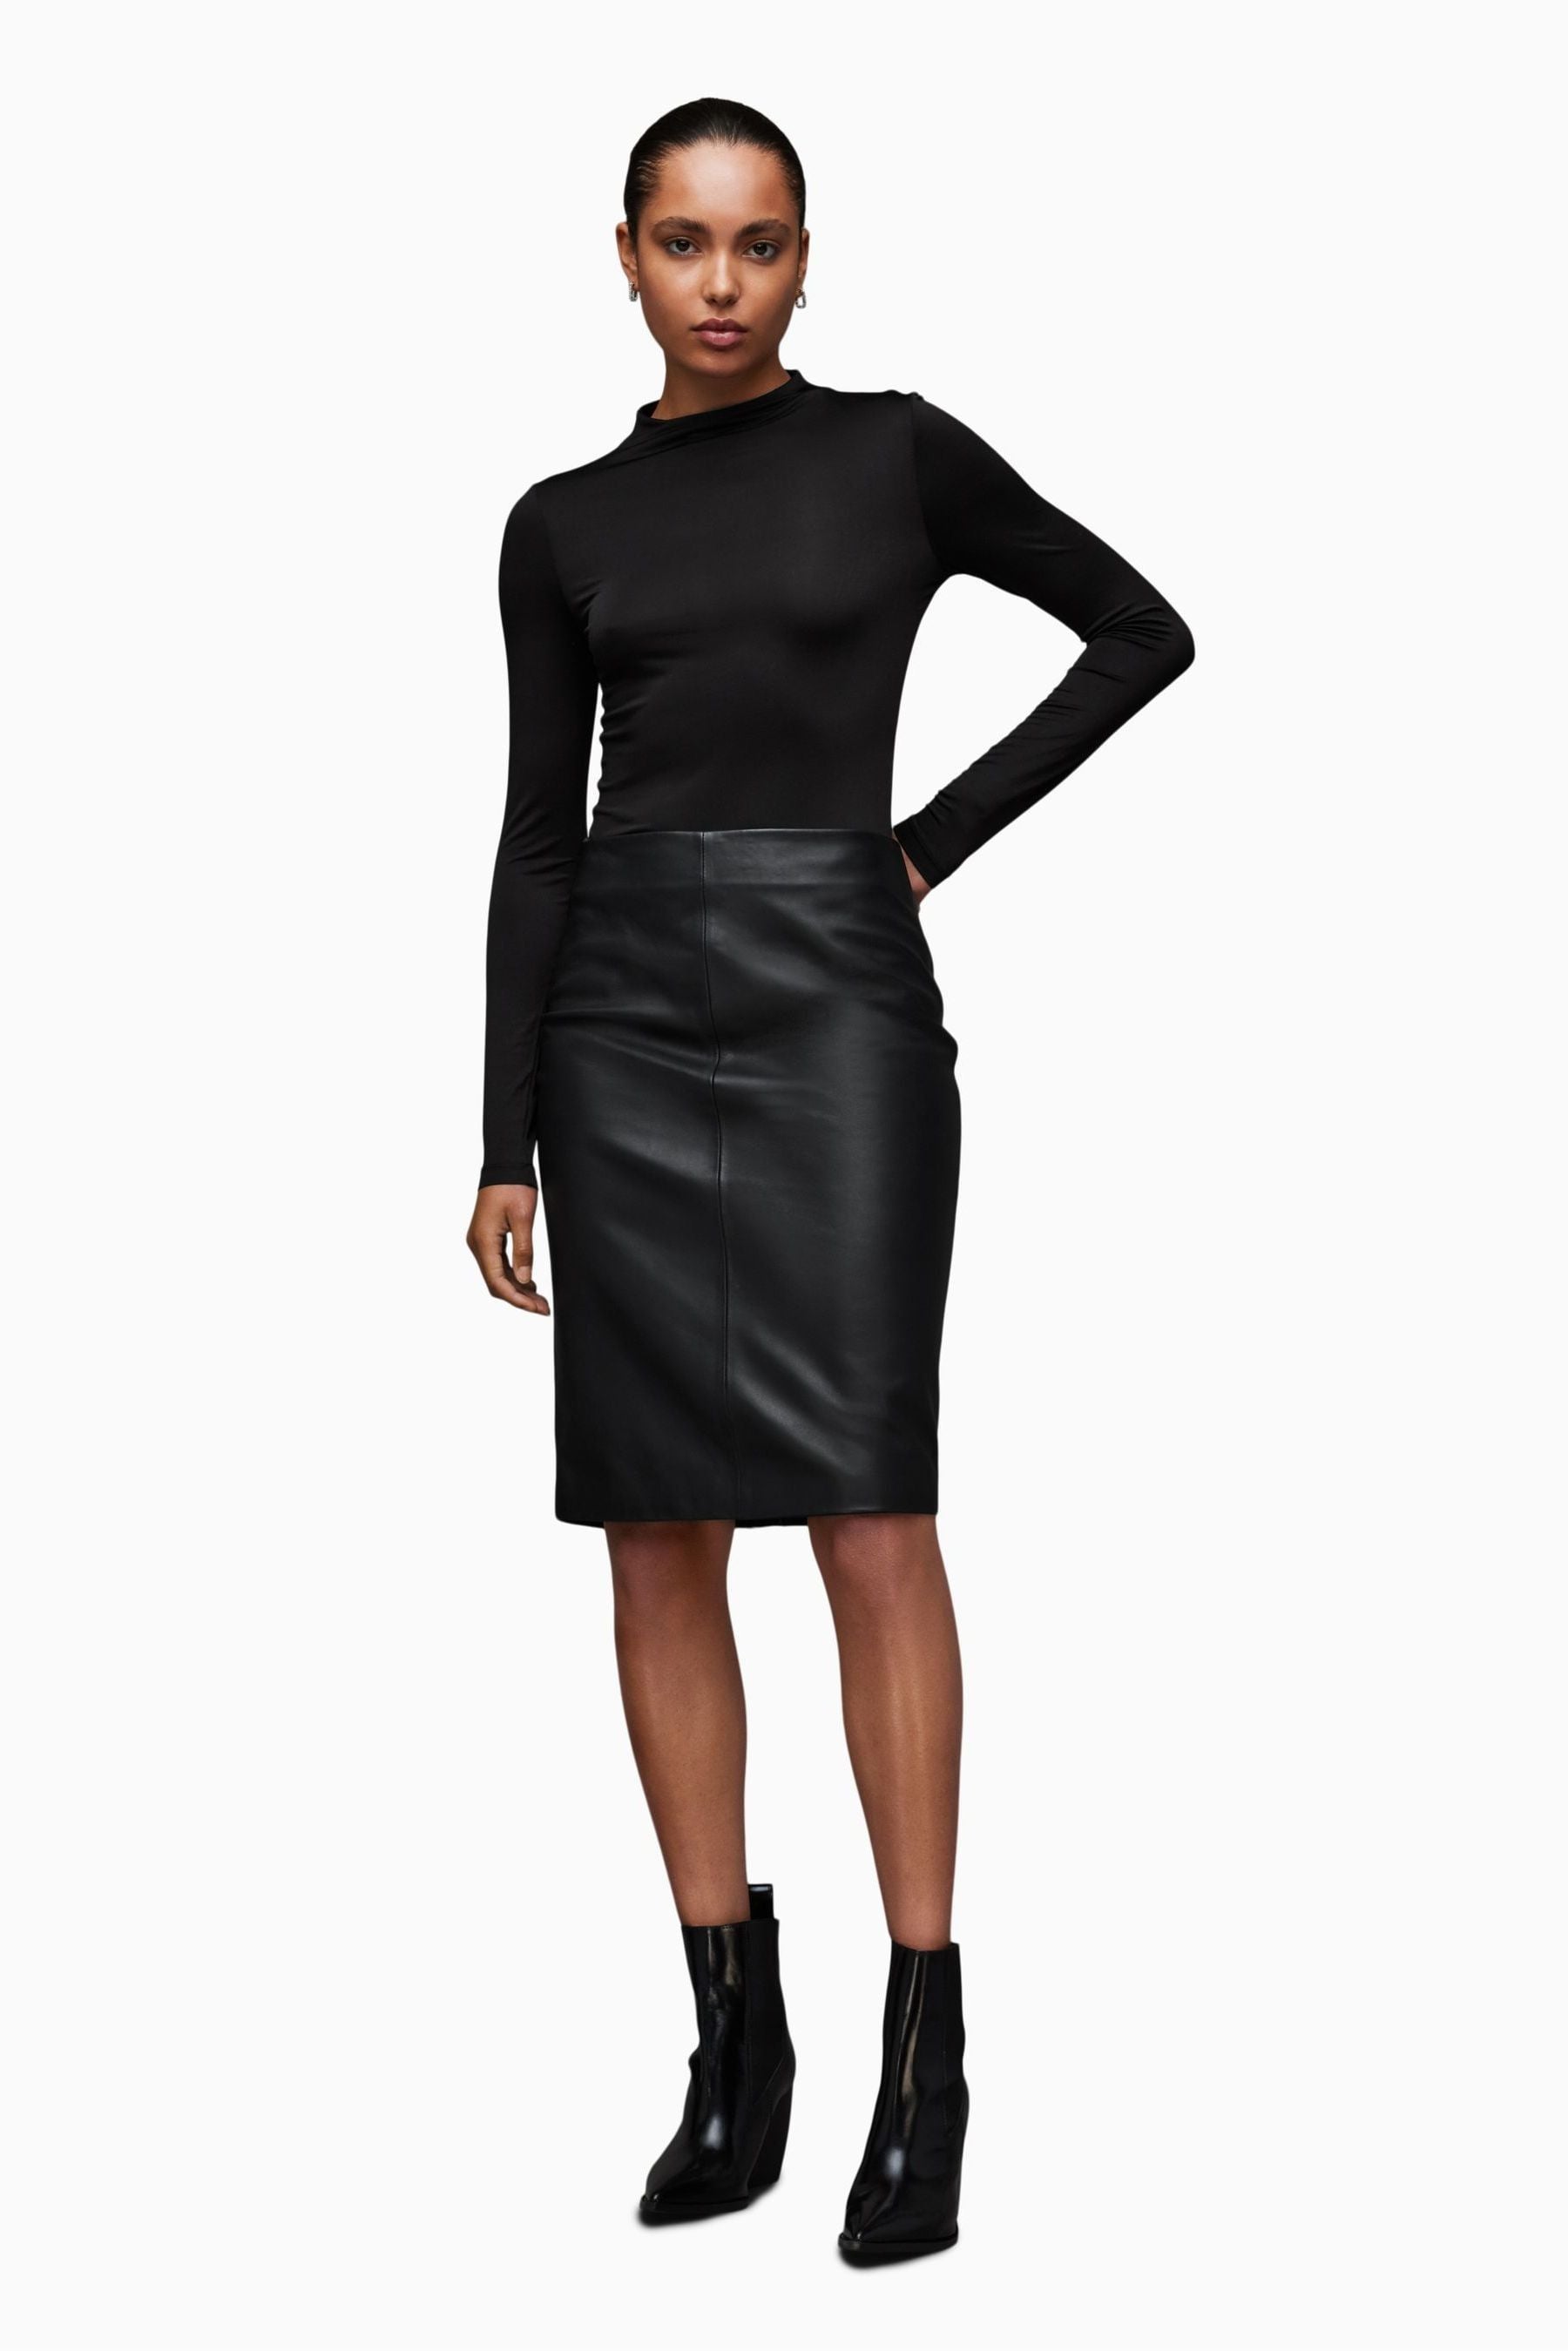 Buy AllSaints Black Leather Lucille Skirt from the Next UK online shop